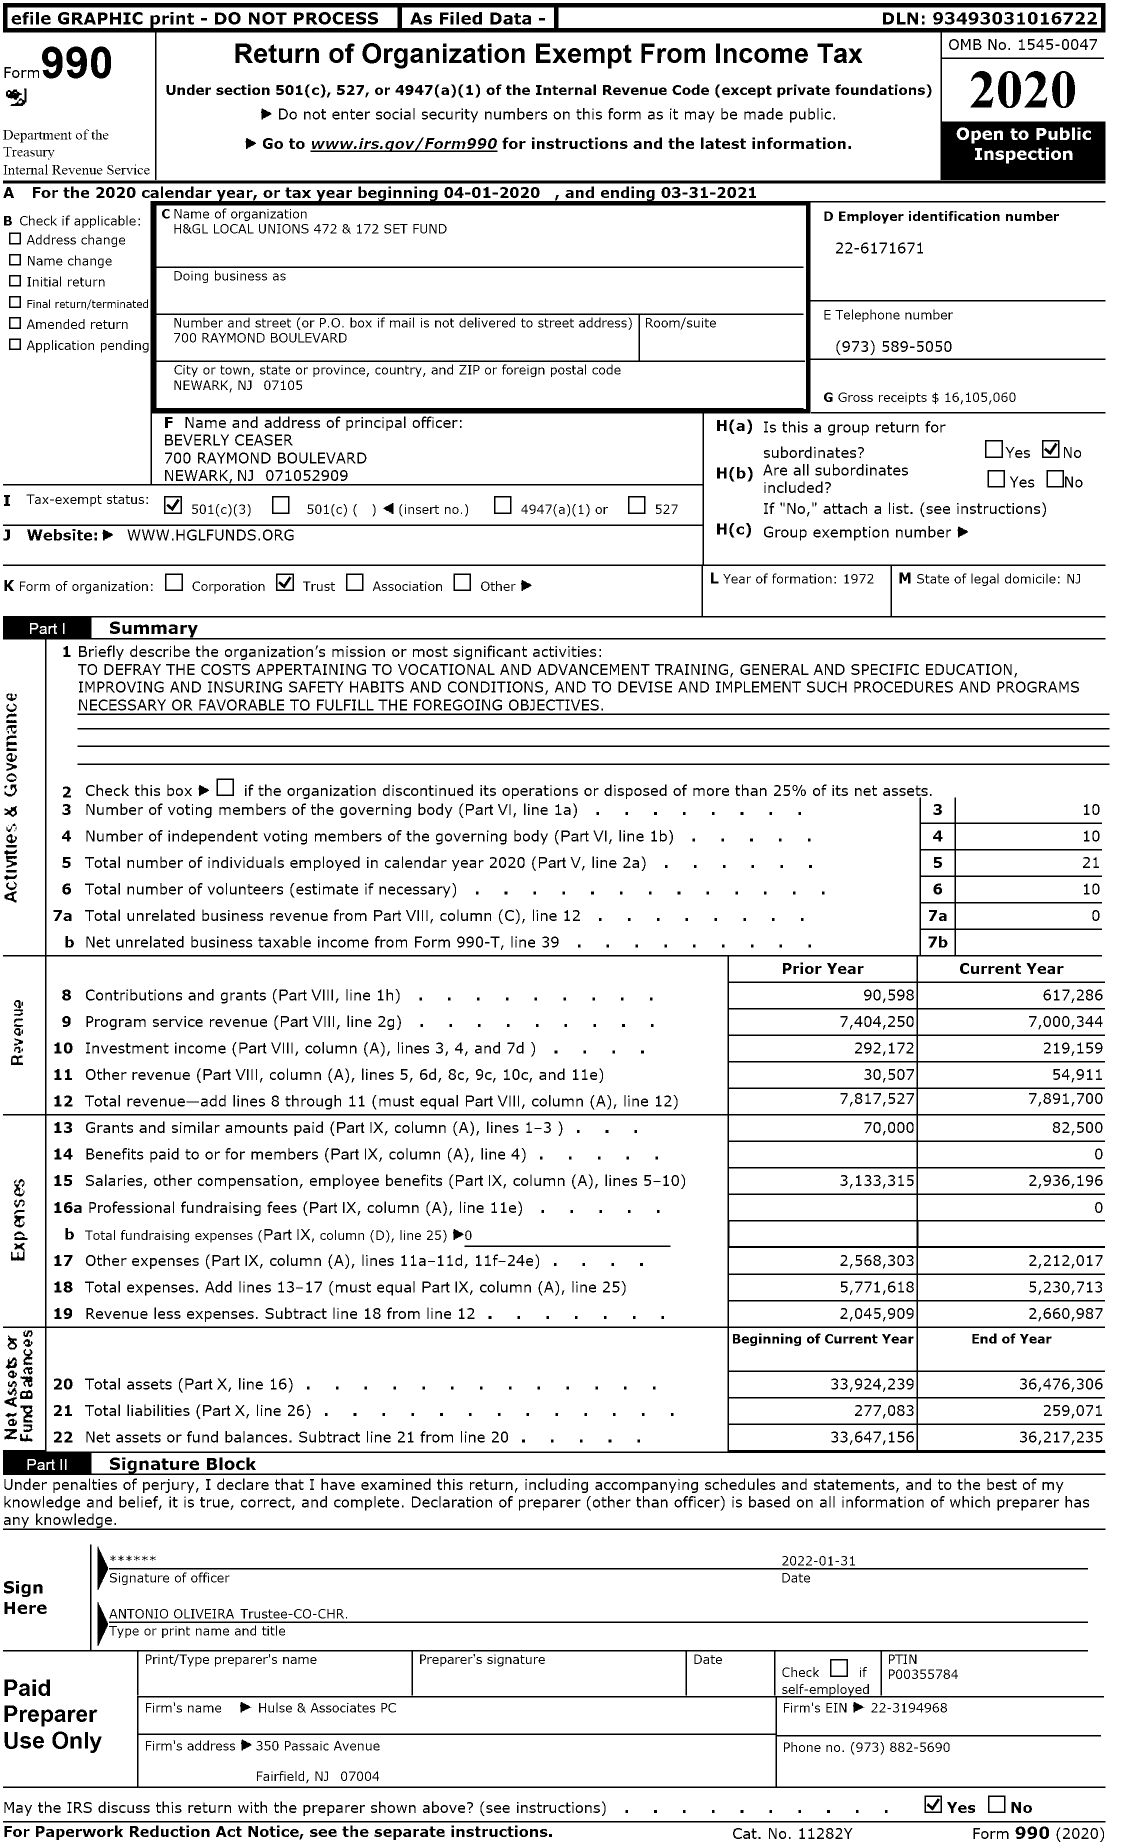 Image of first page of 2020 Form 990 for Heavy and General Laborers' Local Unions 472 and 172 Safety Education and Training Fund Set Fund